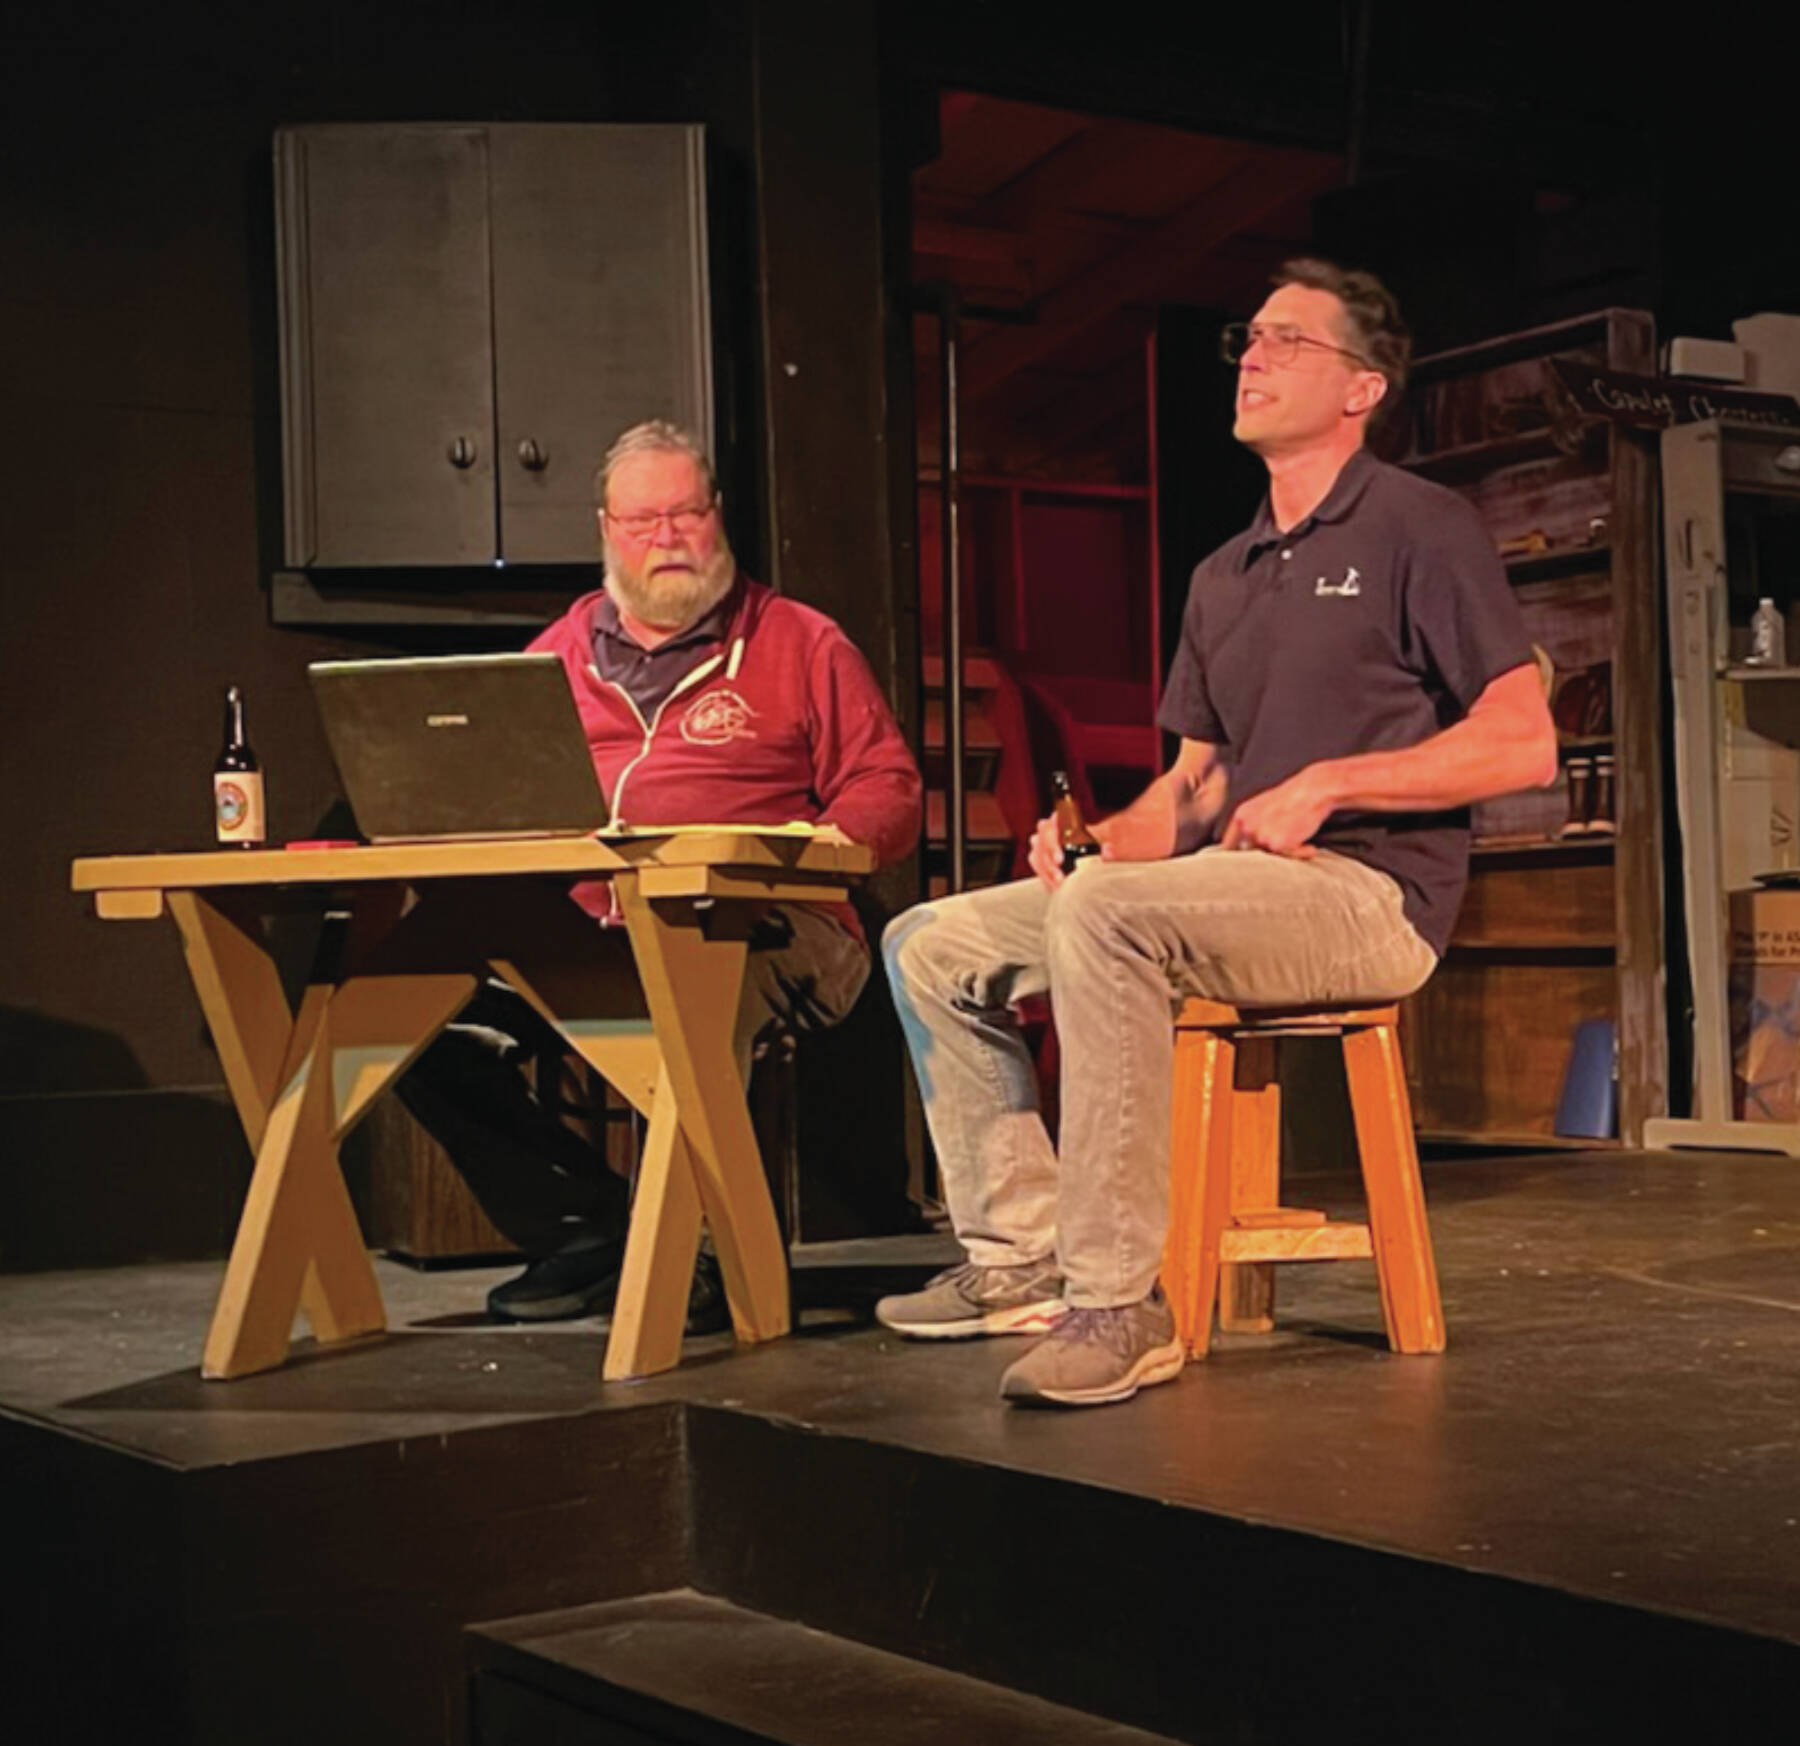 Peter Norton and Sascha Petersen perform a scene from “Pier 1.0: Staging Reality”on the Pier One Theatre stage on Saturday in Homer.